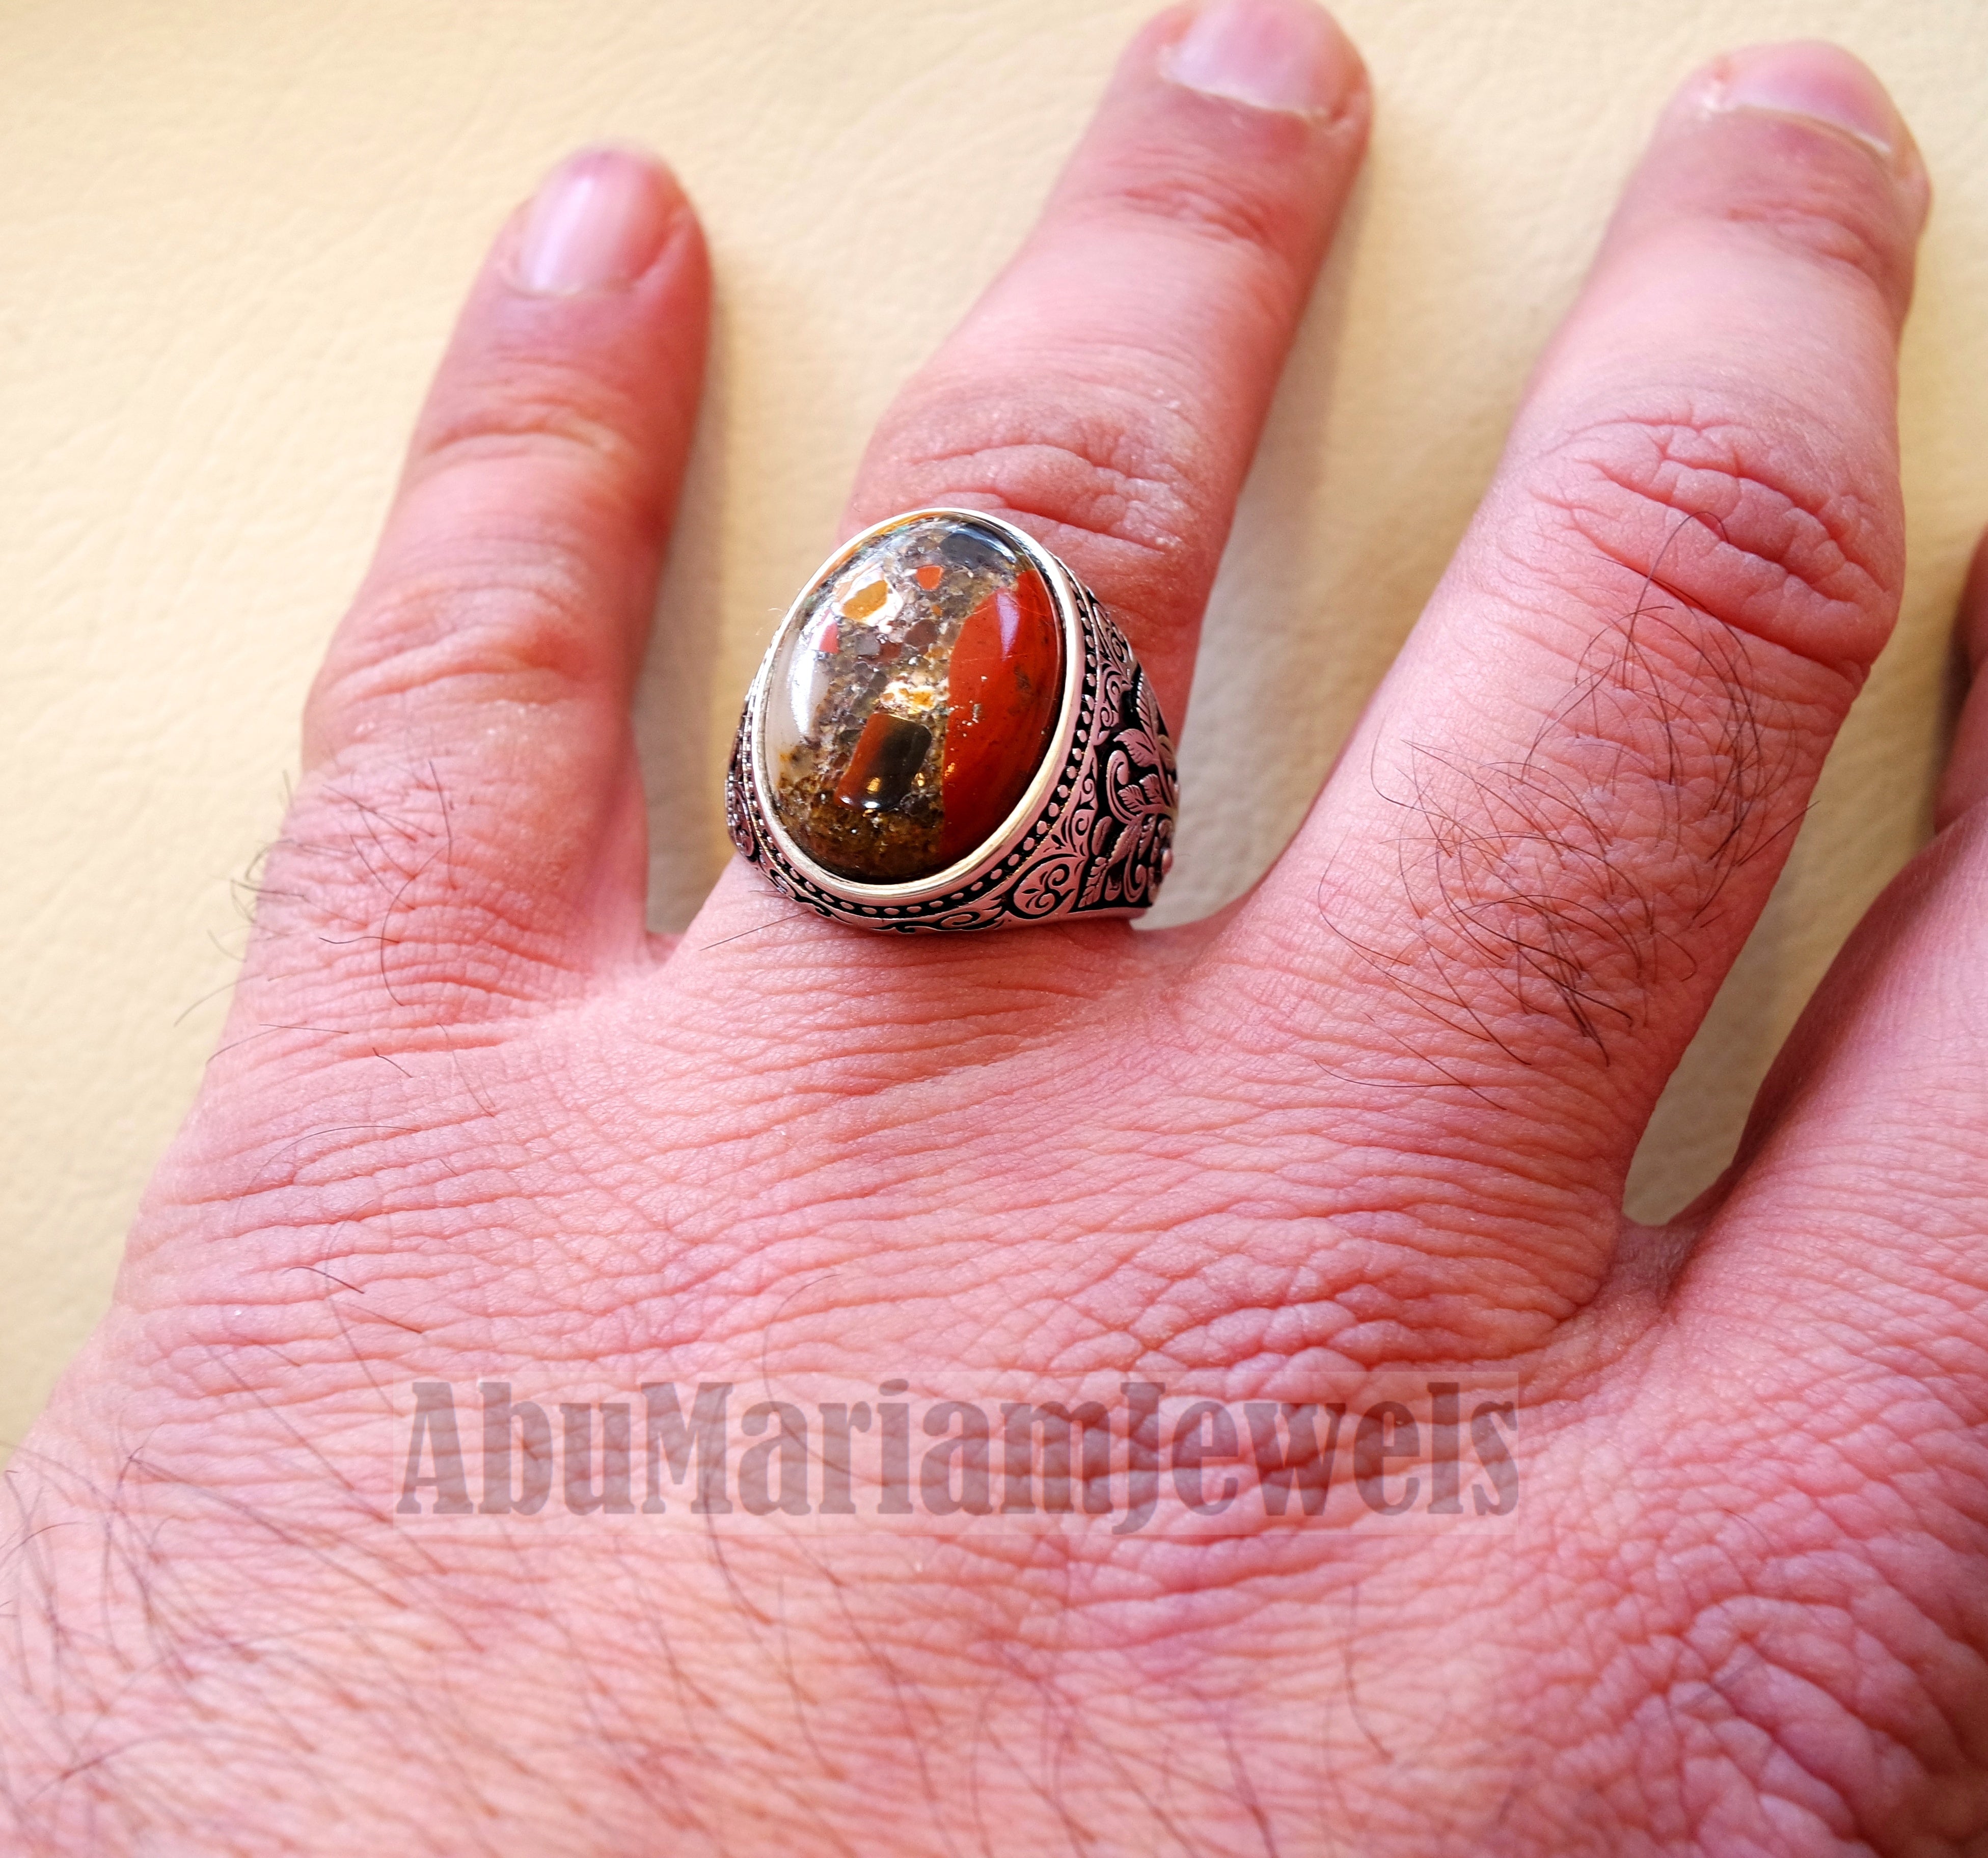 man ring Conglomerate natural stone sterling silver 925 oval cabochon semi precious ottoman style all sizes jewelry colors red brown white